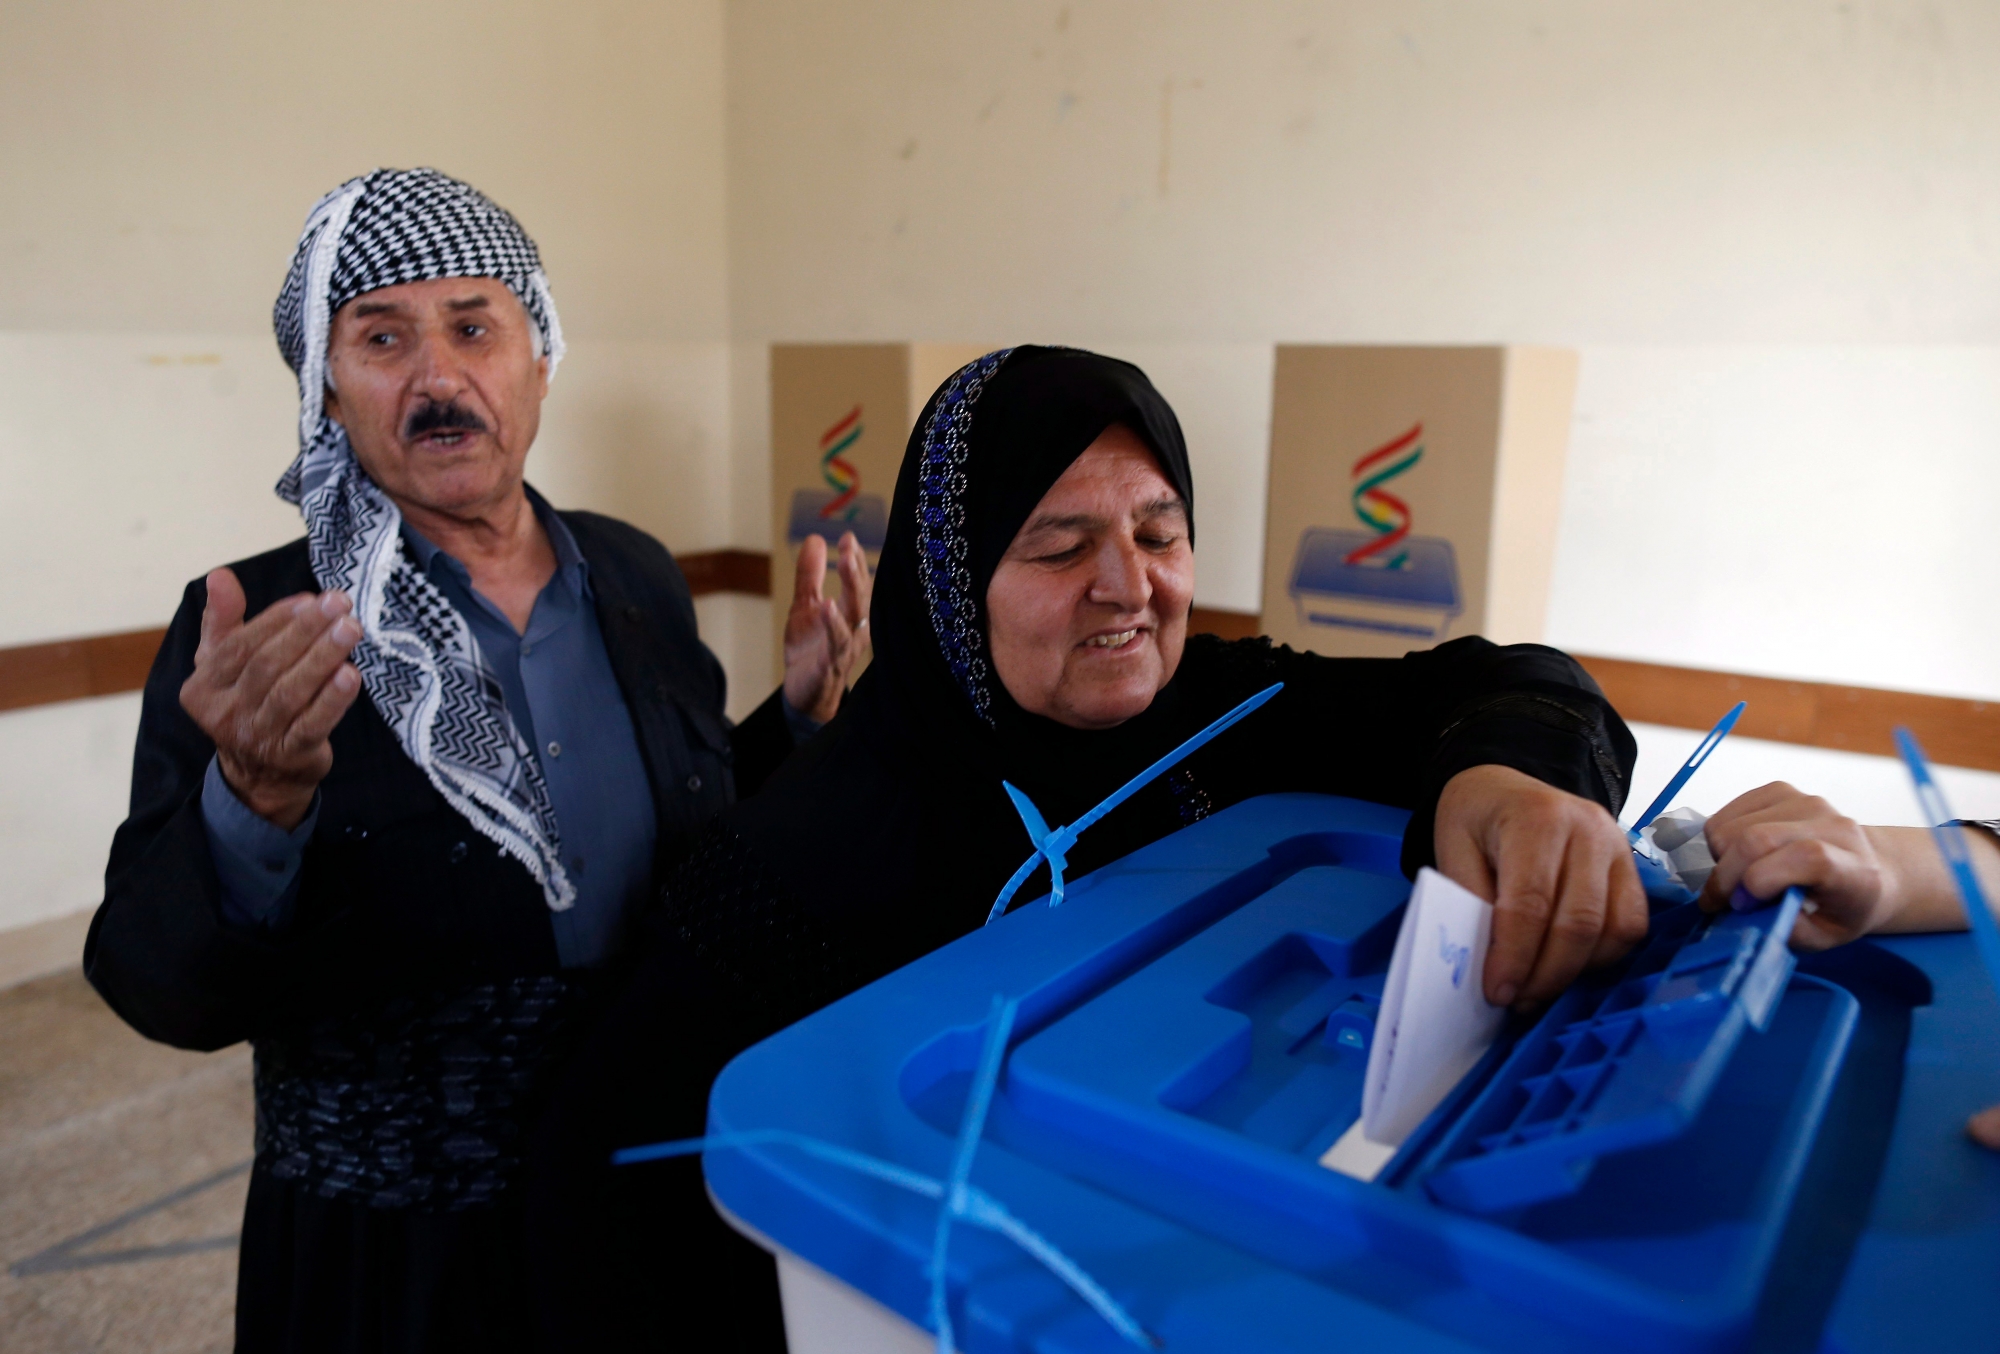 epa06225364 An Iraqi Kurd woman picks up ballot paper before casting her vote at a polling station during Kurdistan independence referendum in Erbil, Kurdistan region in northern Iraq, 25 September 2017. The Kurdistan region is an autonomous region in northern Iraq since 1991, with an estimated population of 5.3 million people. The region share borders with Turkey, Iran, and Syria, all of which have large Kurdish minorities. On 25 September the Kurdistan region holds a referendum for independence and the creation of the state of Kurdistan amidst divided international support.  EPA/MOHAMED MESSARA IRAQ KURDISTAN REFERENDUM